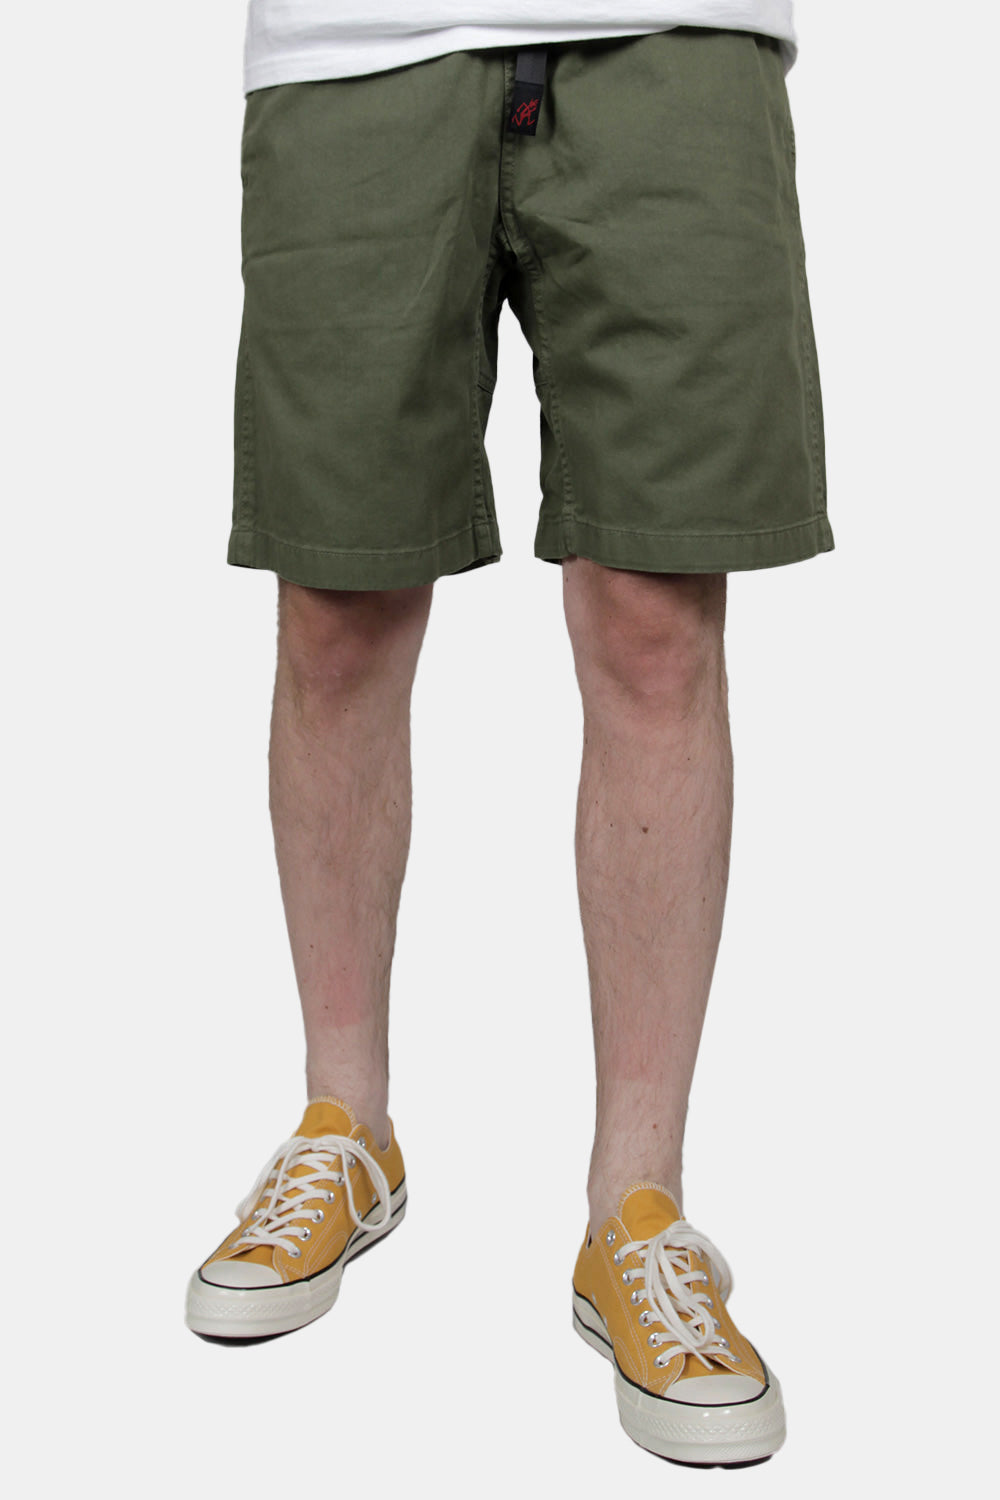 Gramicci G-Shorts Double-ringspun Organic Cotton Twill (Olive) | Number Six